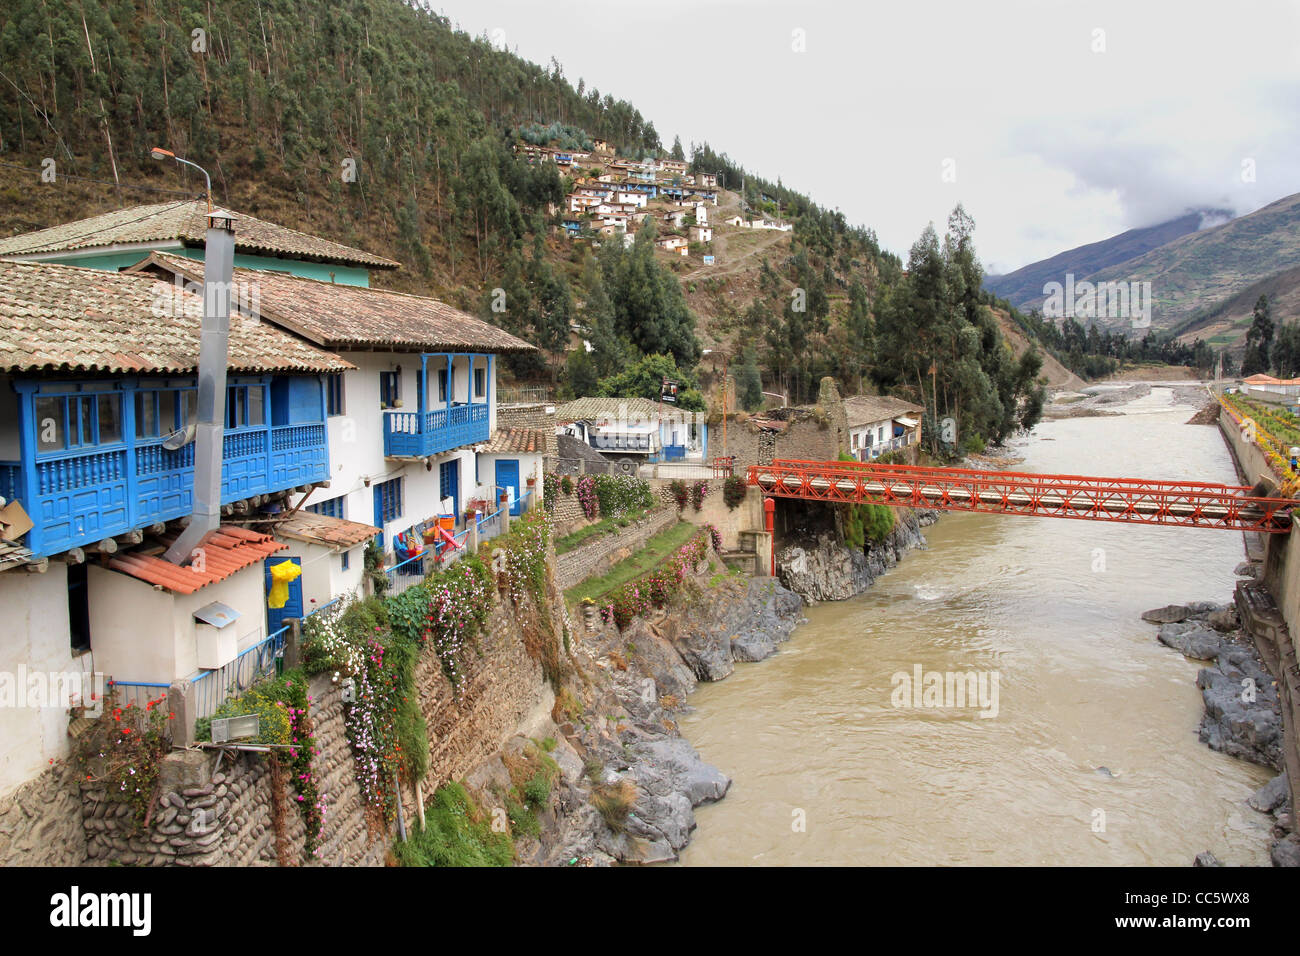 A lovely small mountain village along a river in the Andes Mountains, Peru Stock Photo